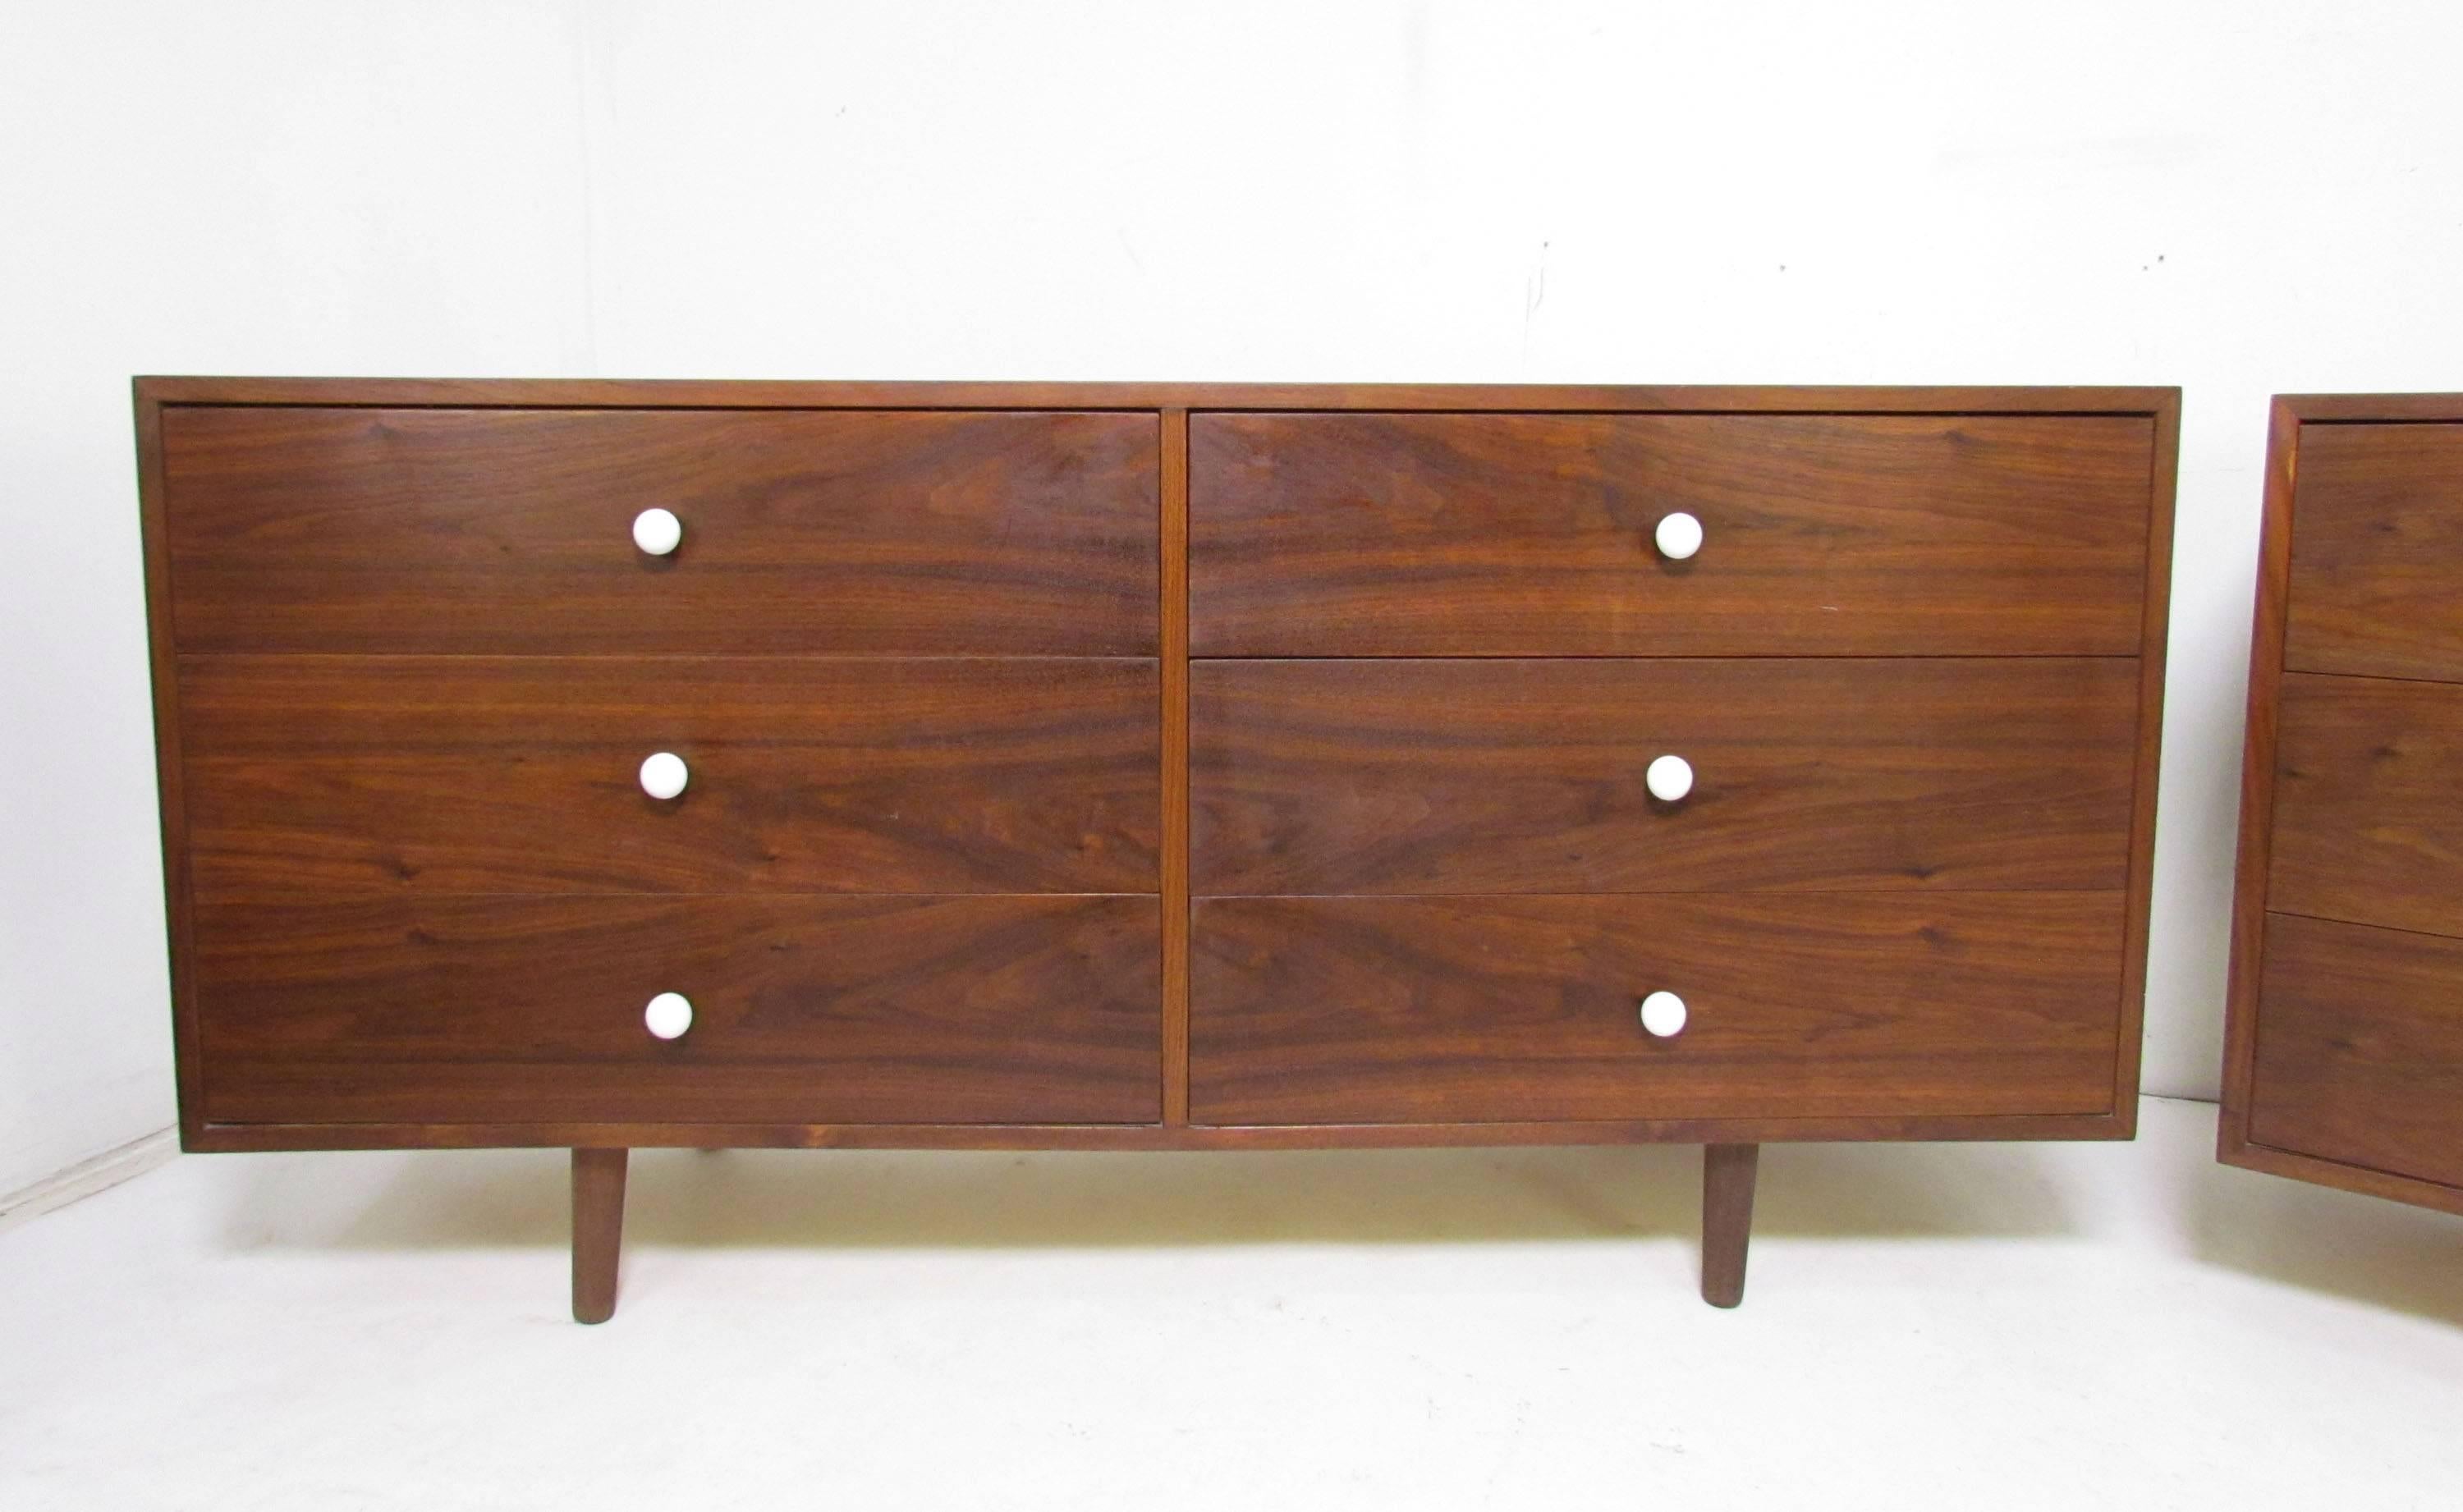 Pair of Mid-Century Modern long low chests of drawers in walnut with white ceramic ball pulls, in the manner of the Declaration Line designed by Kipp Stewart for Drexel. Unmarked, possibly custom-made, circa 1960s.